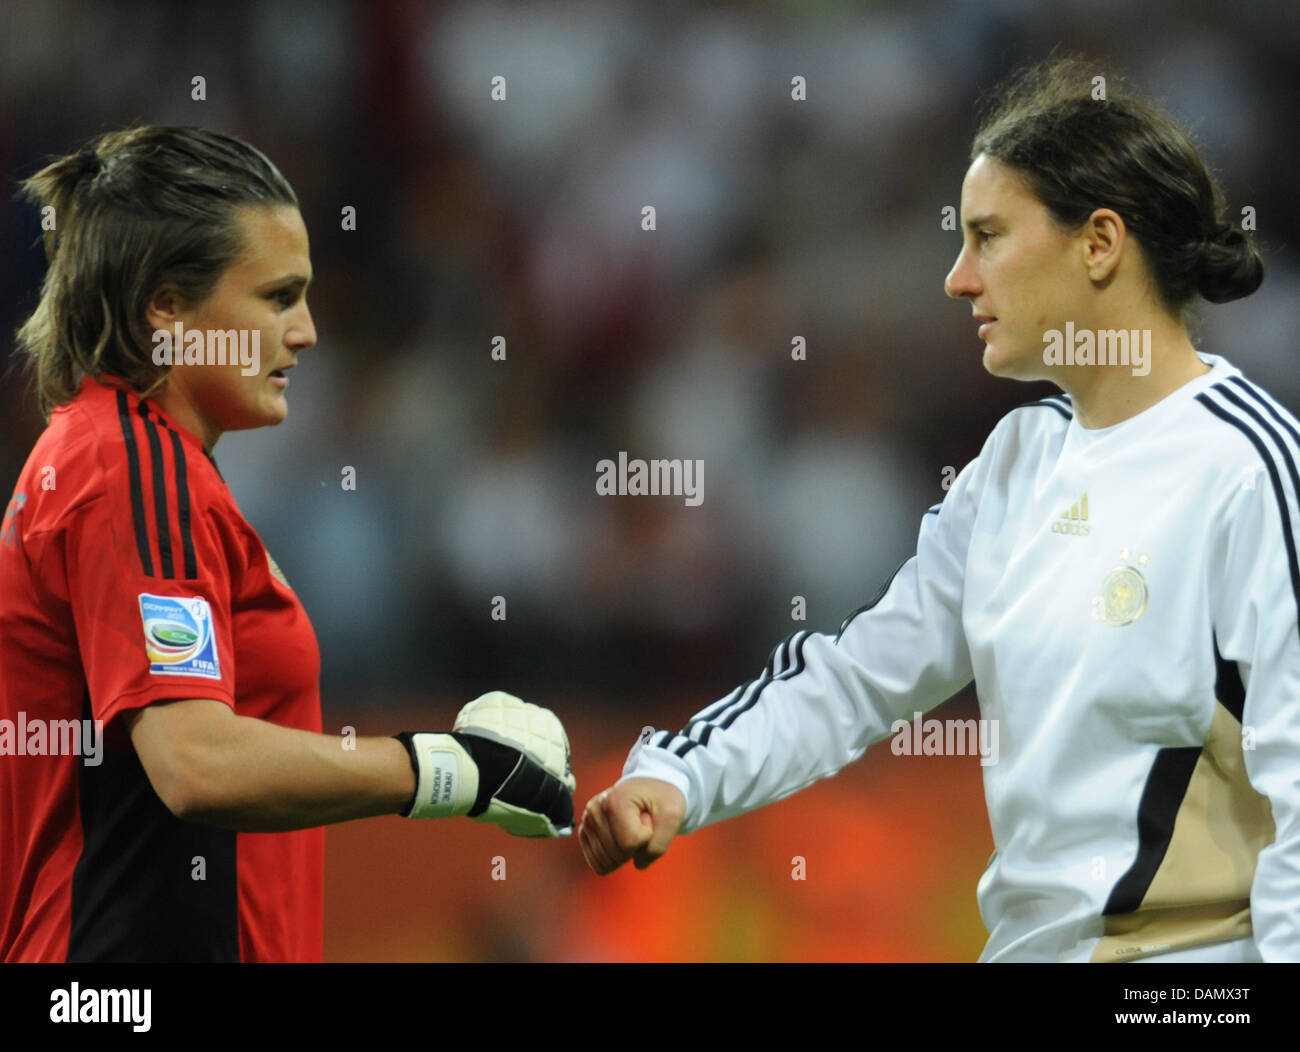 Germany's goalkeeper Nadine Angerer (L) and Birgit Prinz after the Group A match Germany against Nigeria of FIFA Women's World Cup soccer tournament at the FIFA Women's World Cup Stadium in Frankfurt, Germany, 30 June 2011. Foto: Arne Dedert dpa/lhe  +++(c) dpa - Bildfunk+++ Stock Photo